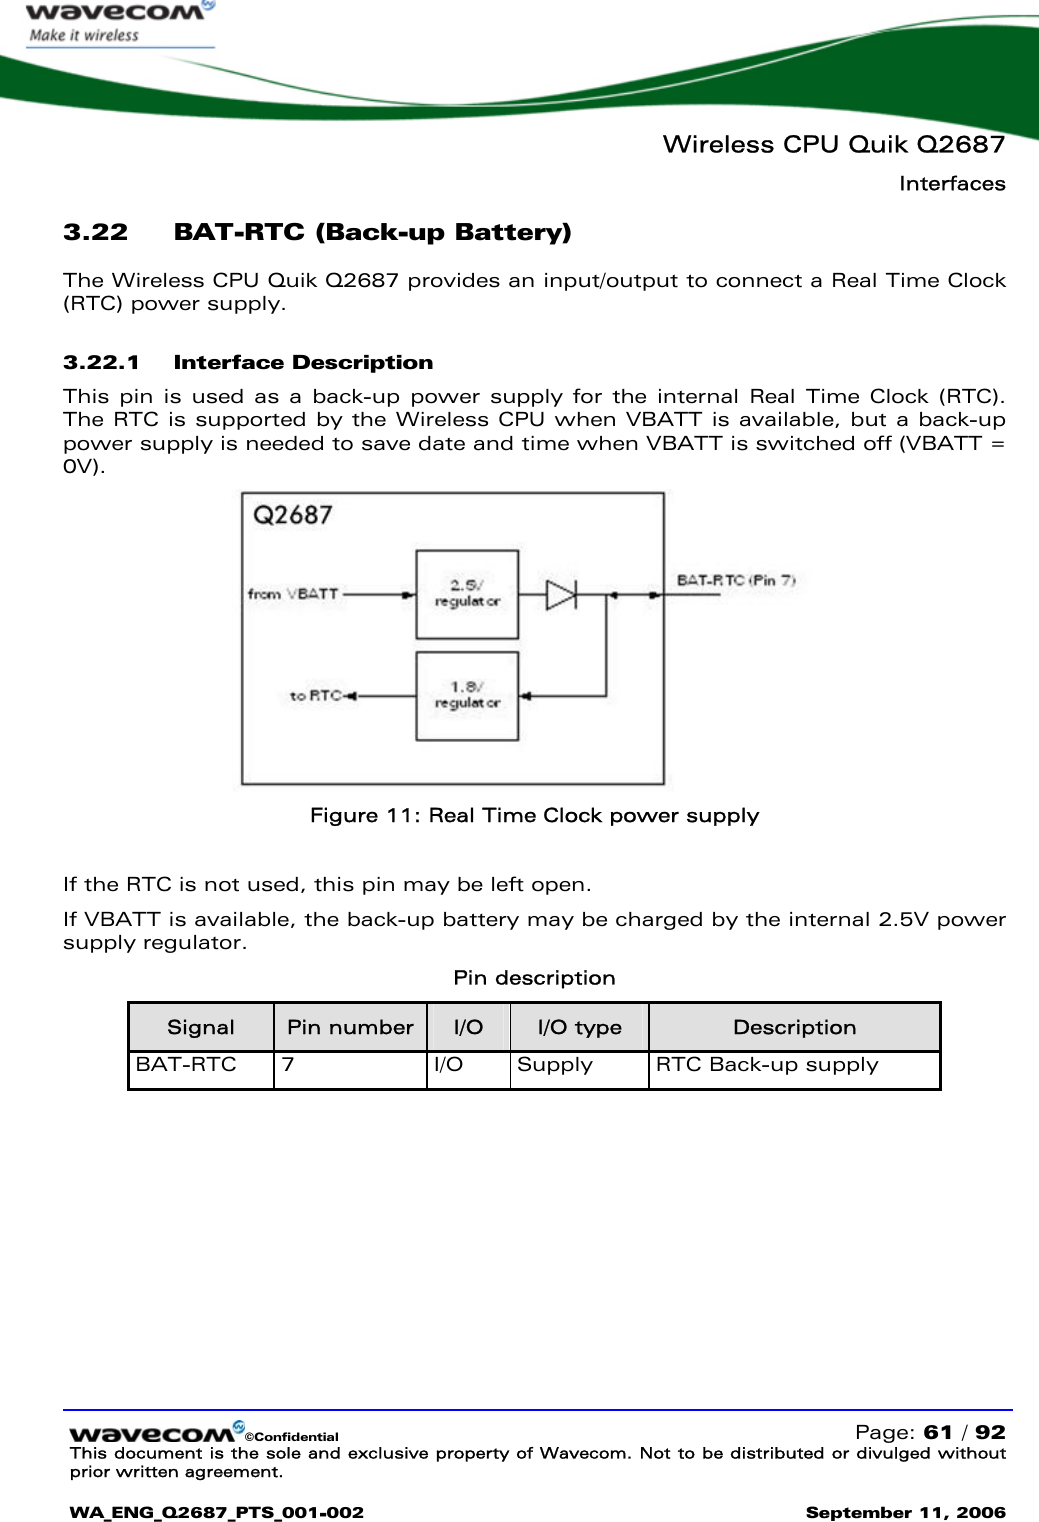   Wireless CPU Quik Q2687 Interfaces   ©Confidential   Page: 61 / 92 This document is the sole and exclusive property of Wavecom. Not to be distributed or divulged without prior written agreement.  WA_ENG_Q2687_PTS_001-002 September 11, 2006   3.22 BAT-RTC (Back-up Battery) The Wireless CPU Quik Q2687 provides an input/output to connect a Real Time Clock (RTC) power supply. 3.22.1 Interface Description This pin is used as a back-up power supply for the internal Real Time Clock (RTC). The RTC is supported by the Wireless CPU when VBATT is available, but a back-up power supply is needed to save date and time when VBATT is switched off (VBATT = 0V).  Figure 11: Real Time Clock power supply  If the RTC is not used, this pin may be left open. If VBATT is available, the back-up battery may be charged by the internal 2.5V power supply regulator. Pin description Signal  Pin number  I/O  I/O type  Description BAT-RTC 7  I/O  Supply  RTC Back-up supply  